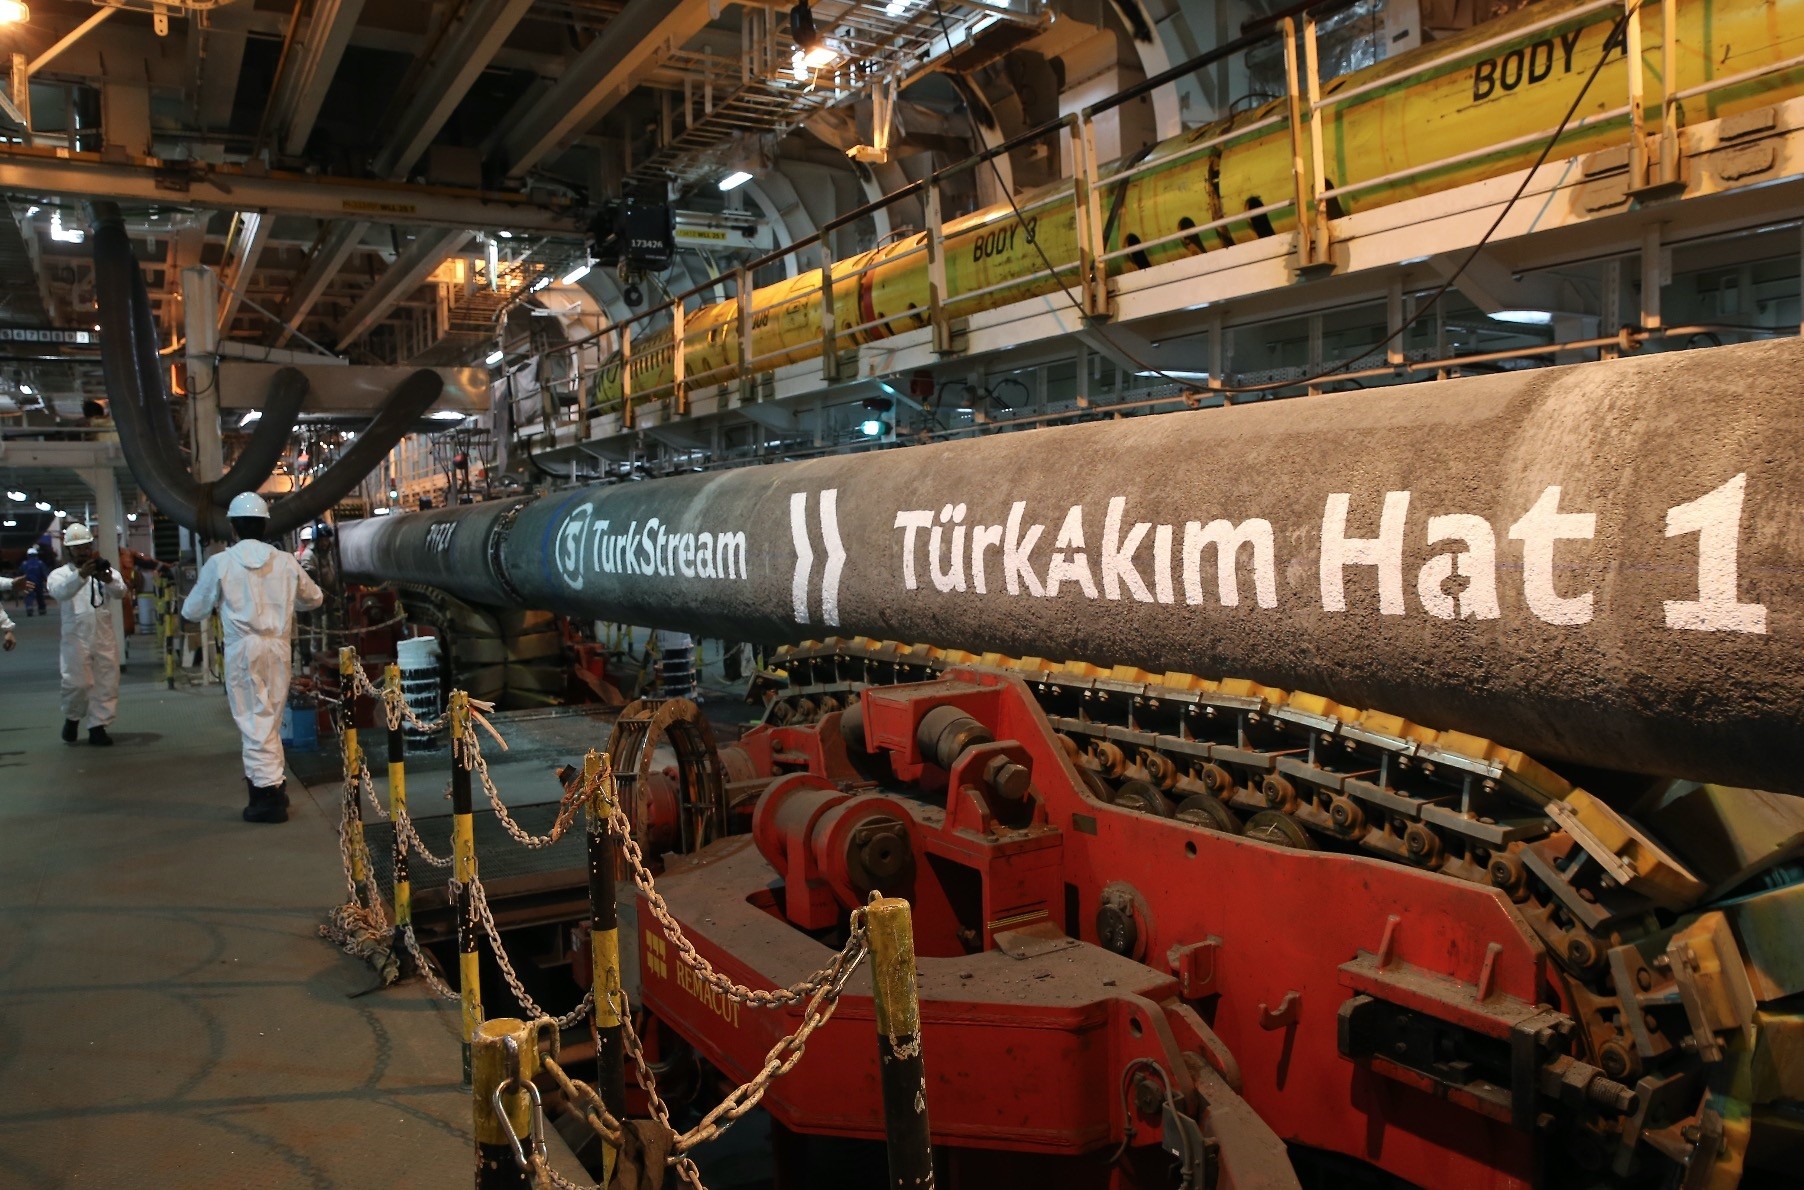 Gazprom and BOTAu015e will create a joint venture, TurkStream Gas Transport, to construct the second line of the TurkStream project.